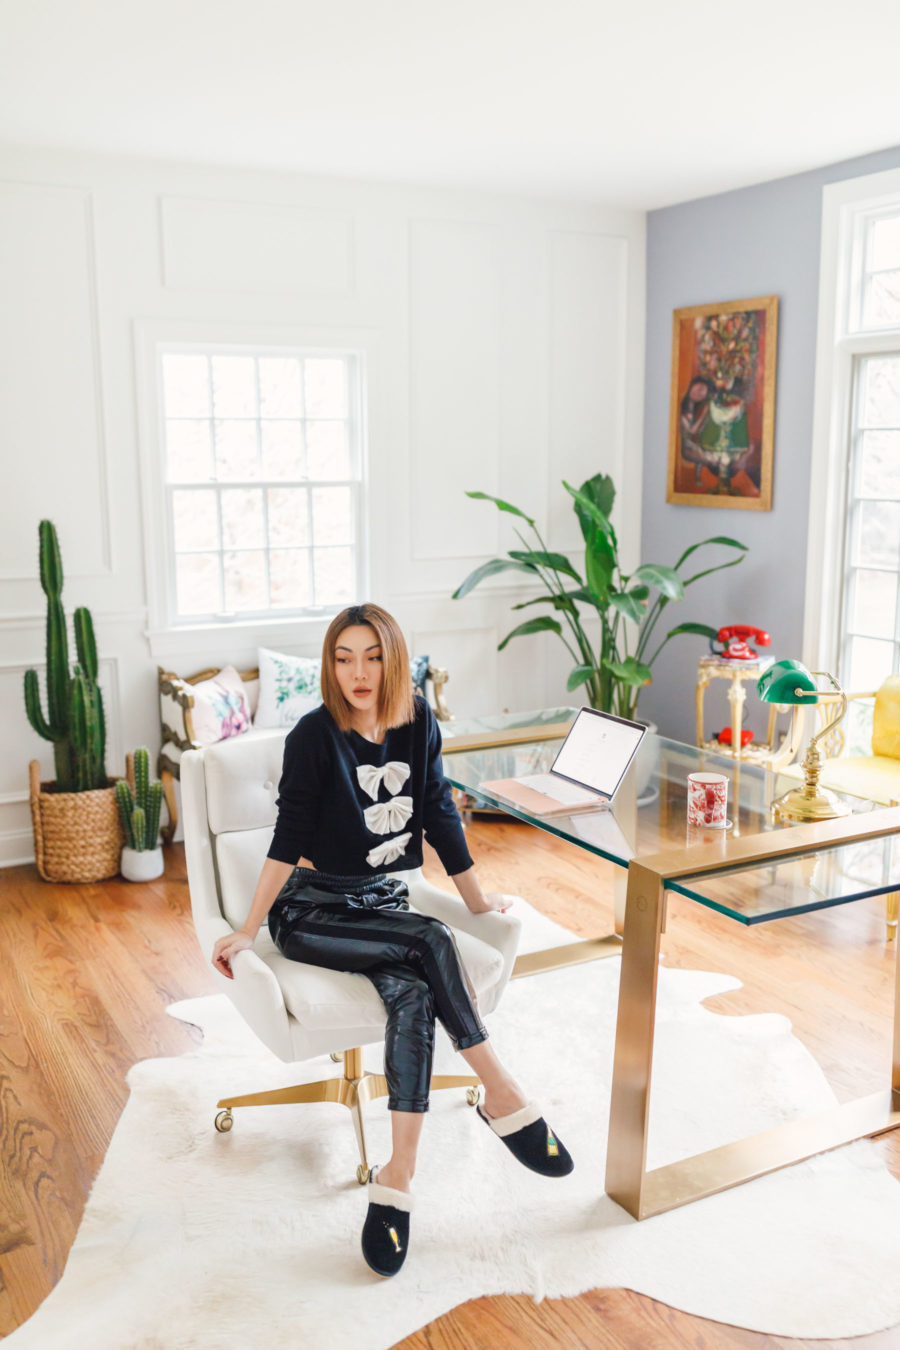 fashion blogger jessica wang at her home office sharing ways to stay productive // Jessica Wang - Notjessfashion.com